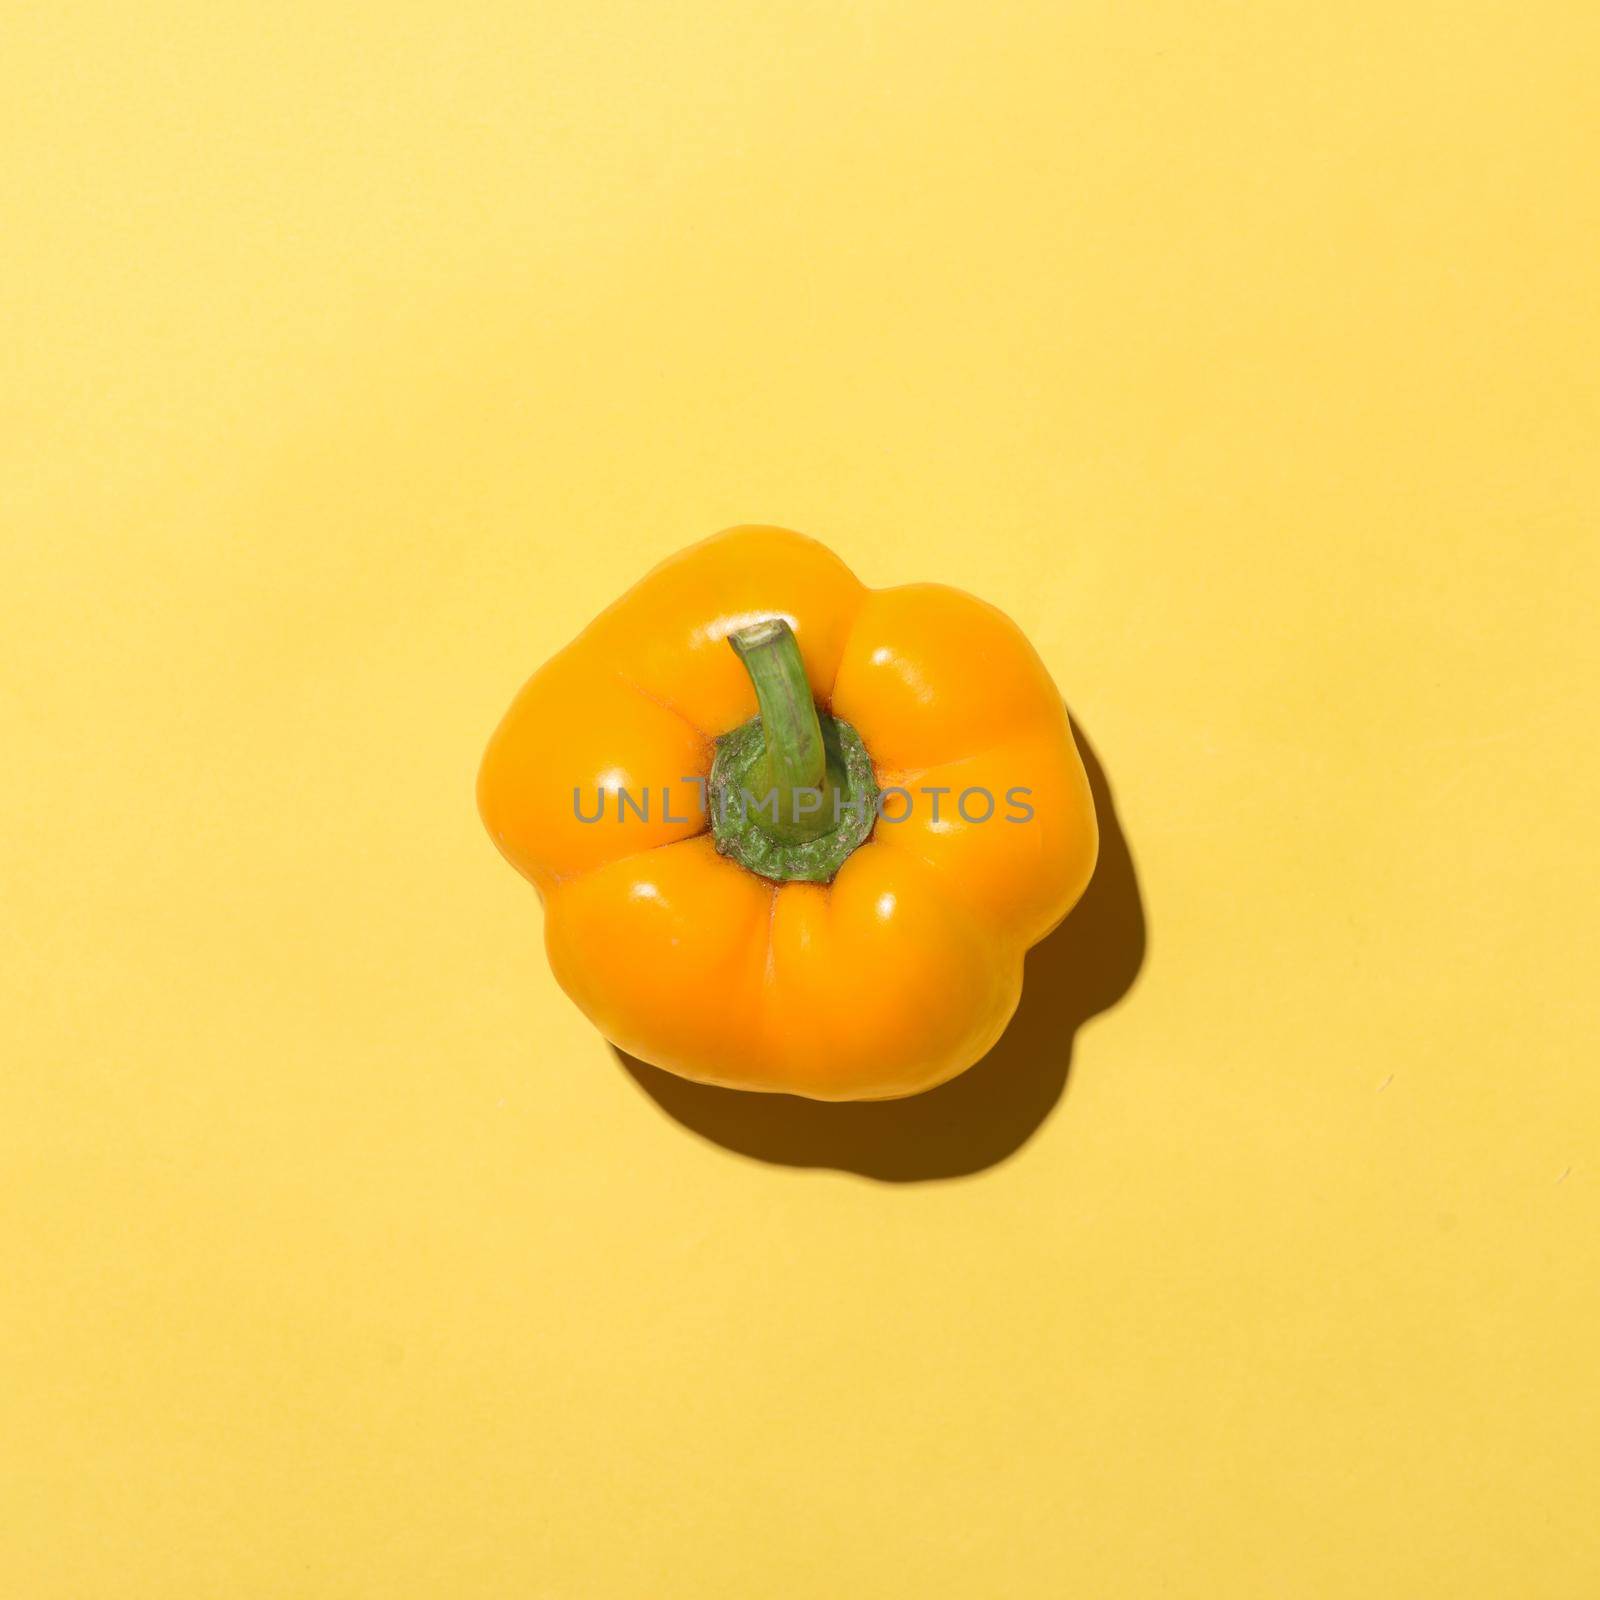 Top view of yellow bell pepper on yellow background.  by makidotvn